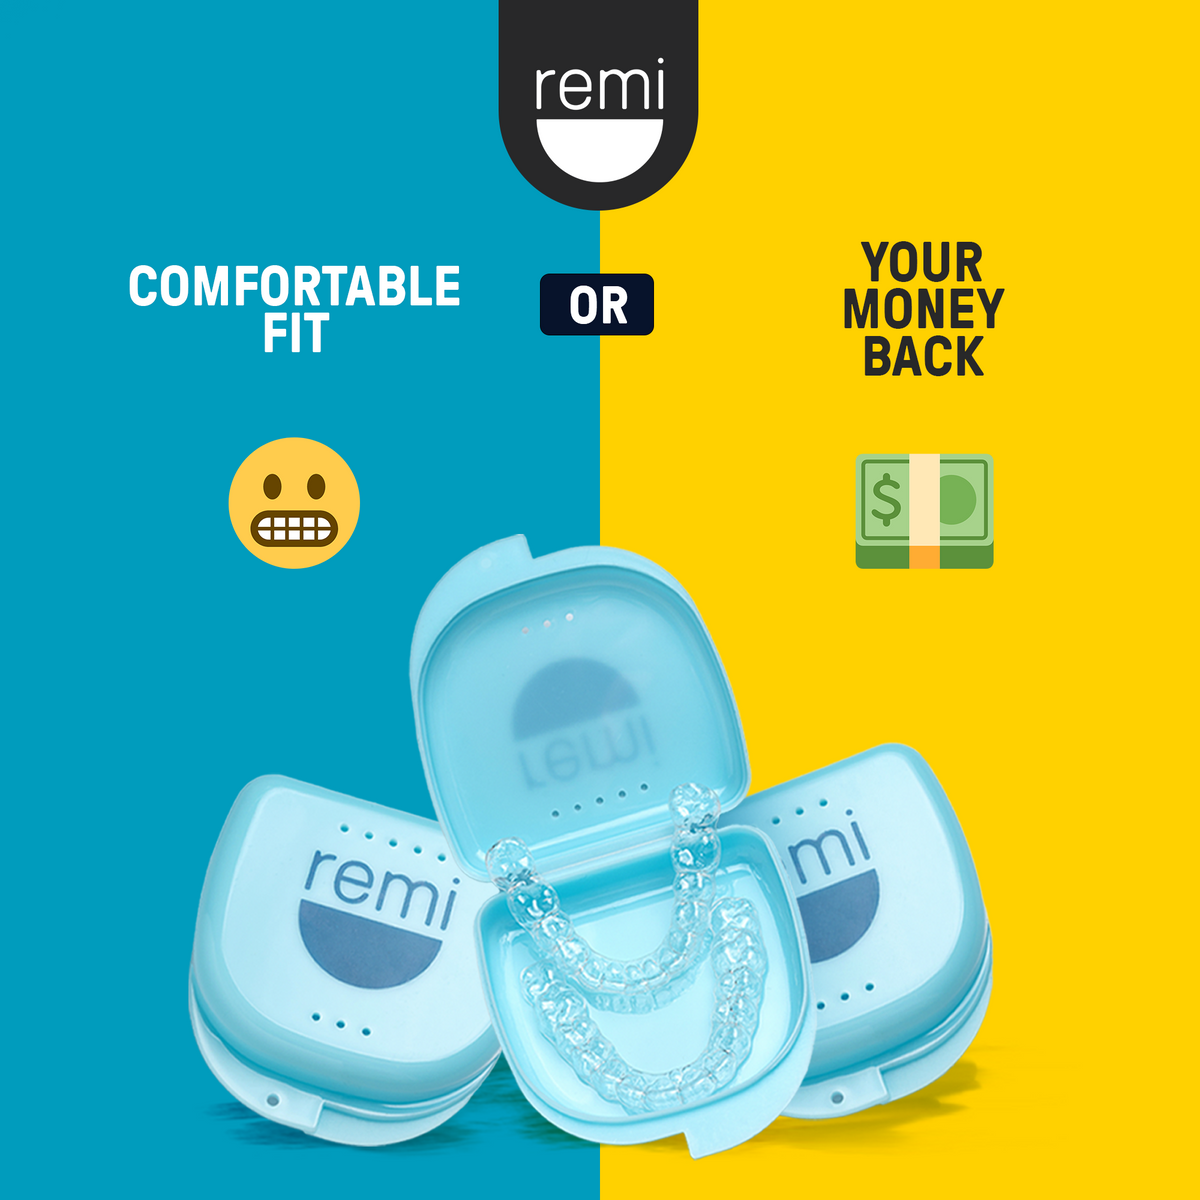 A blue case containing clear dental trays, designed as Custom Night Guards to alleviate jaw pain, set against a split background with text: &quot;Comfortable Fit&quot; on the left and &quot;Your Money Back&quot; on the right.